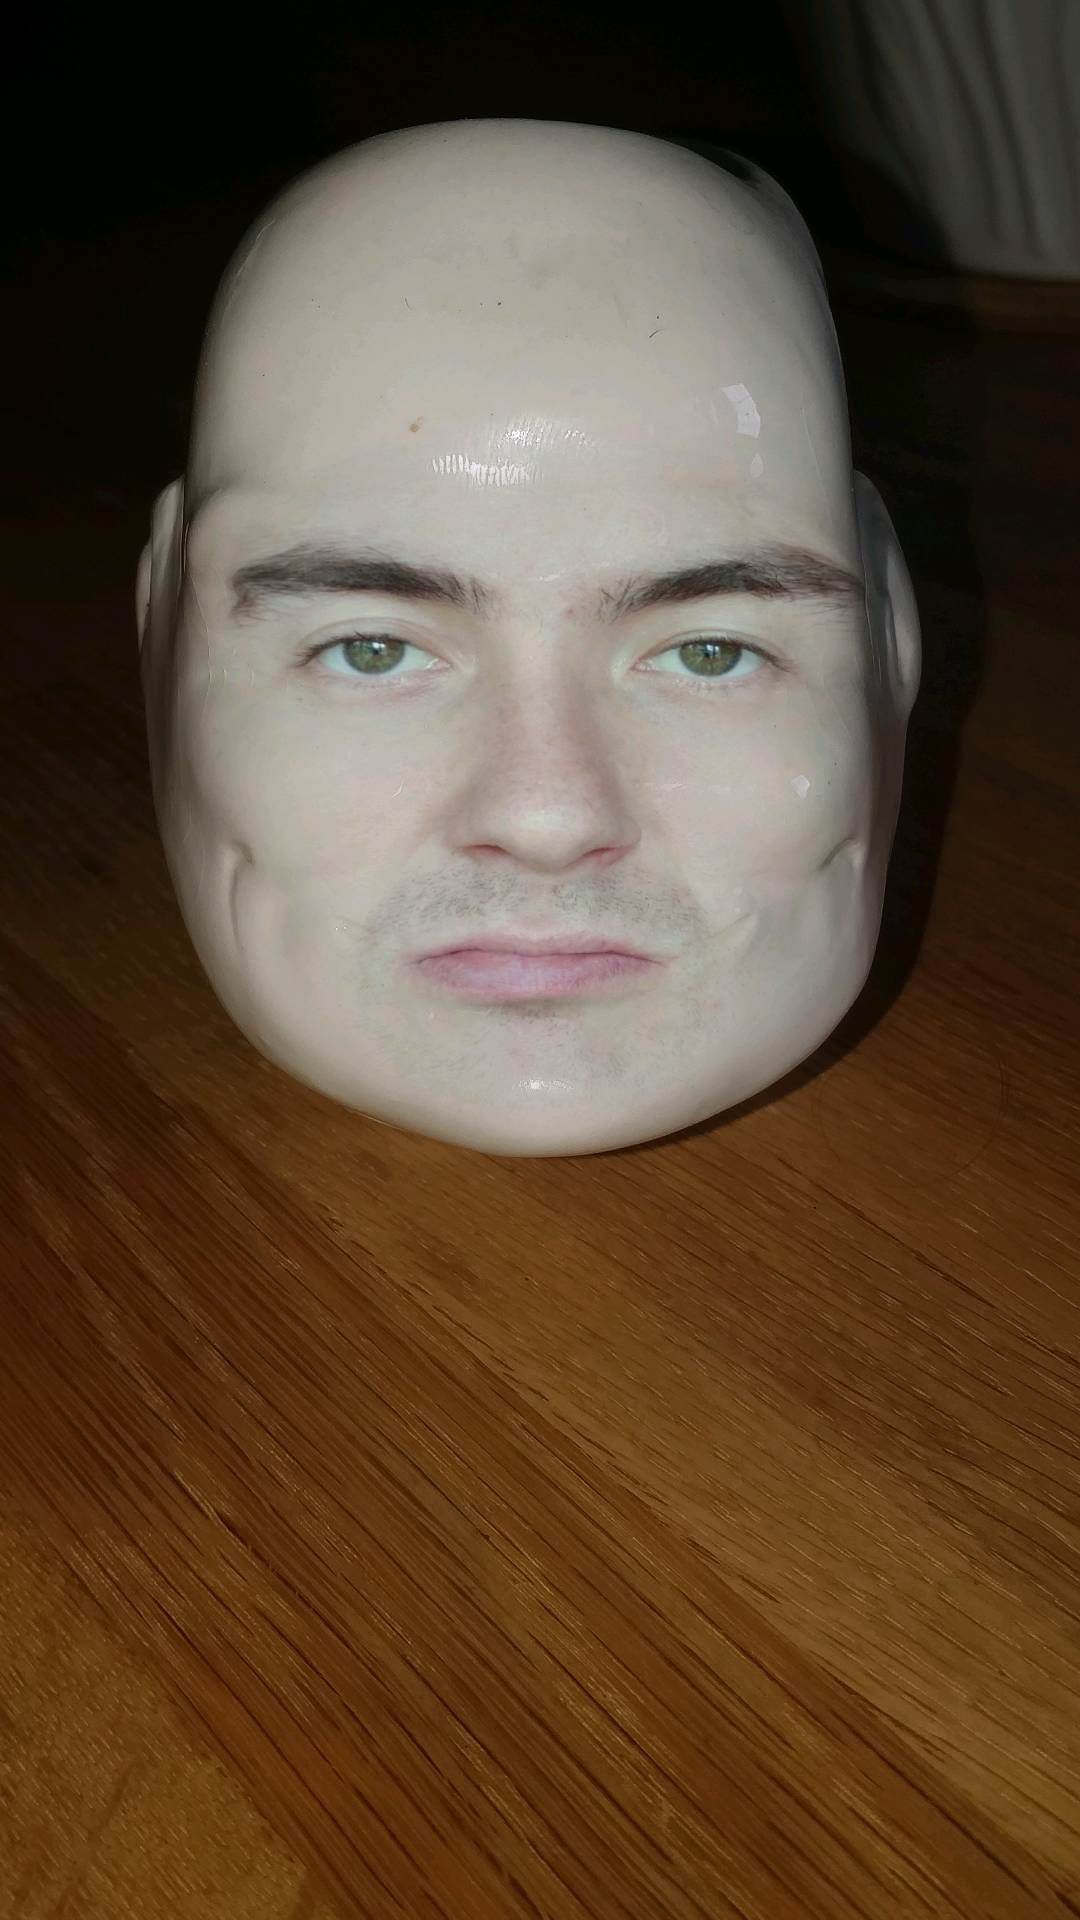 I did a face swap with a head-shaped table ornament.